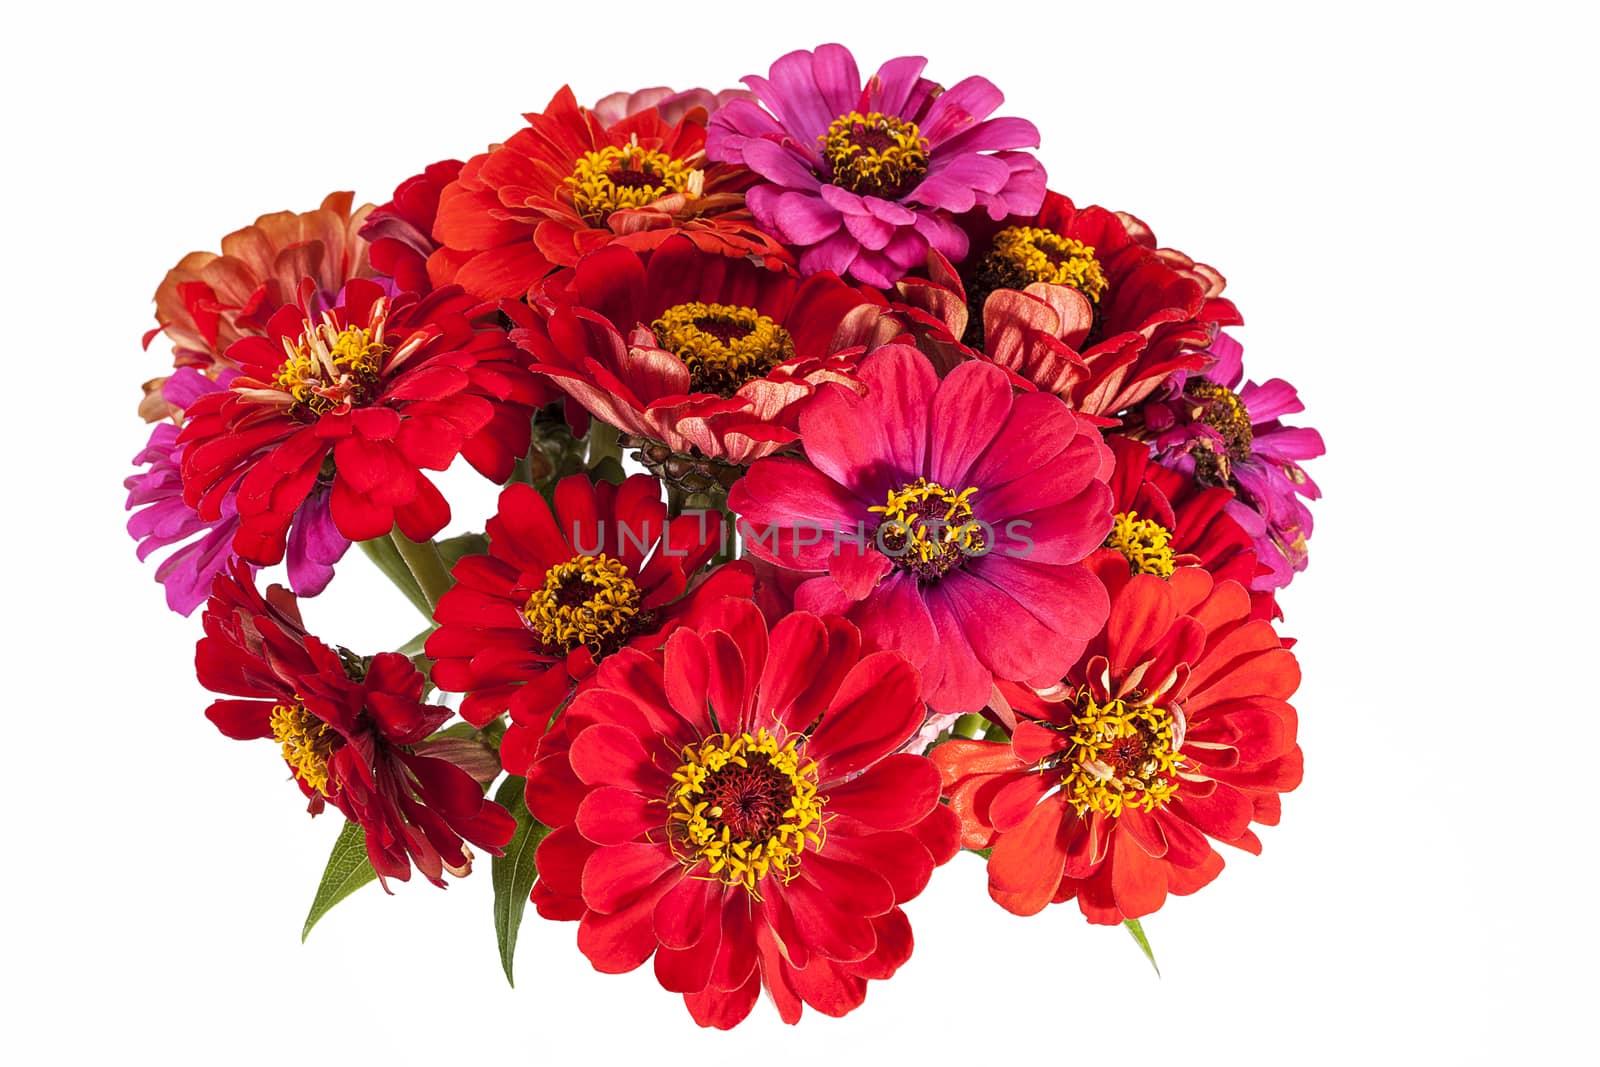 Bouquet of red and pink Zinnia  flowers on white background by mychadre77